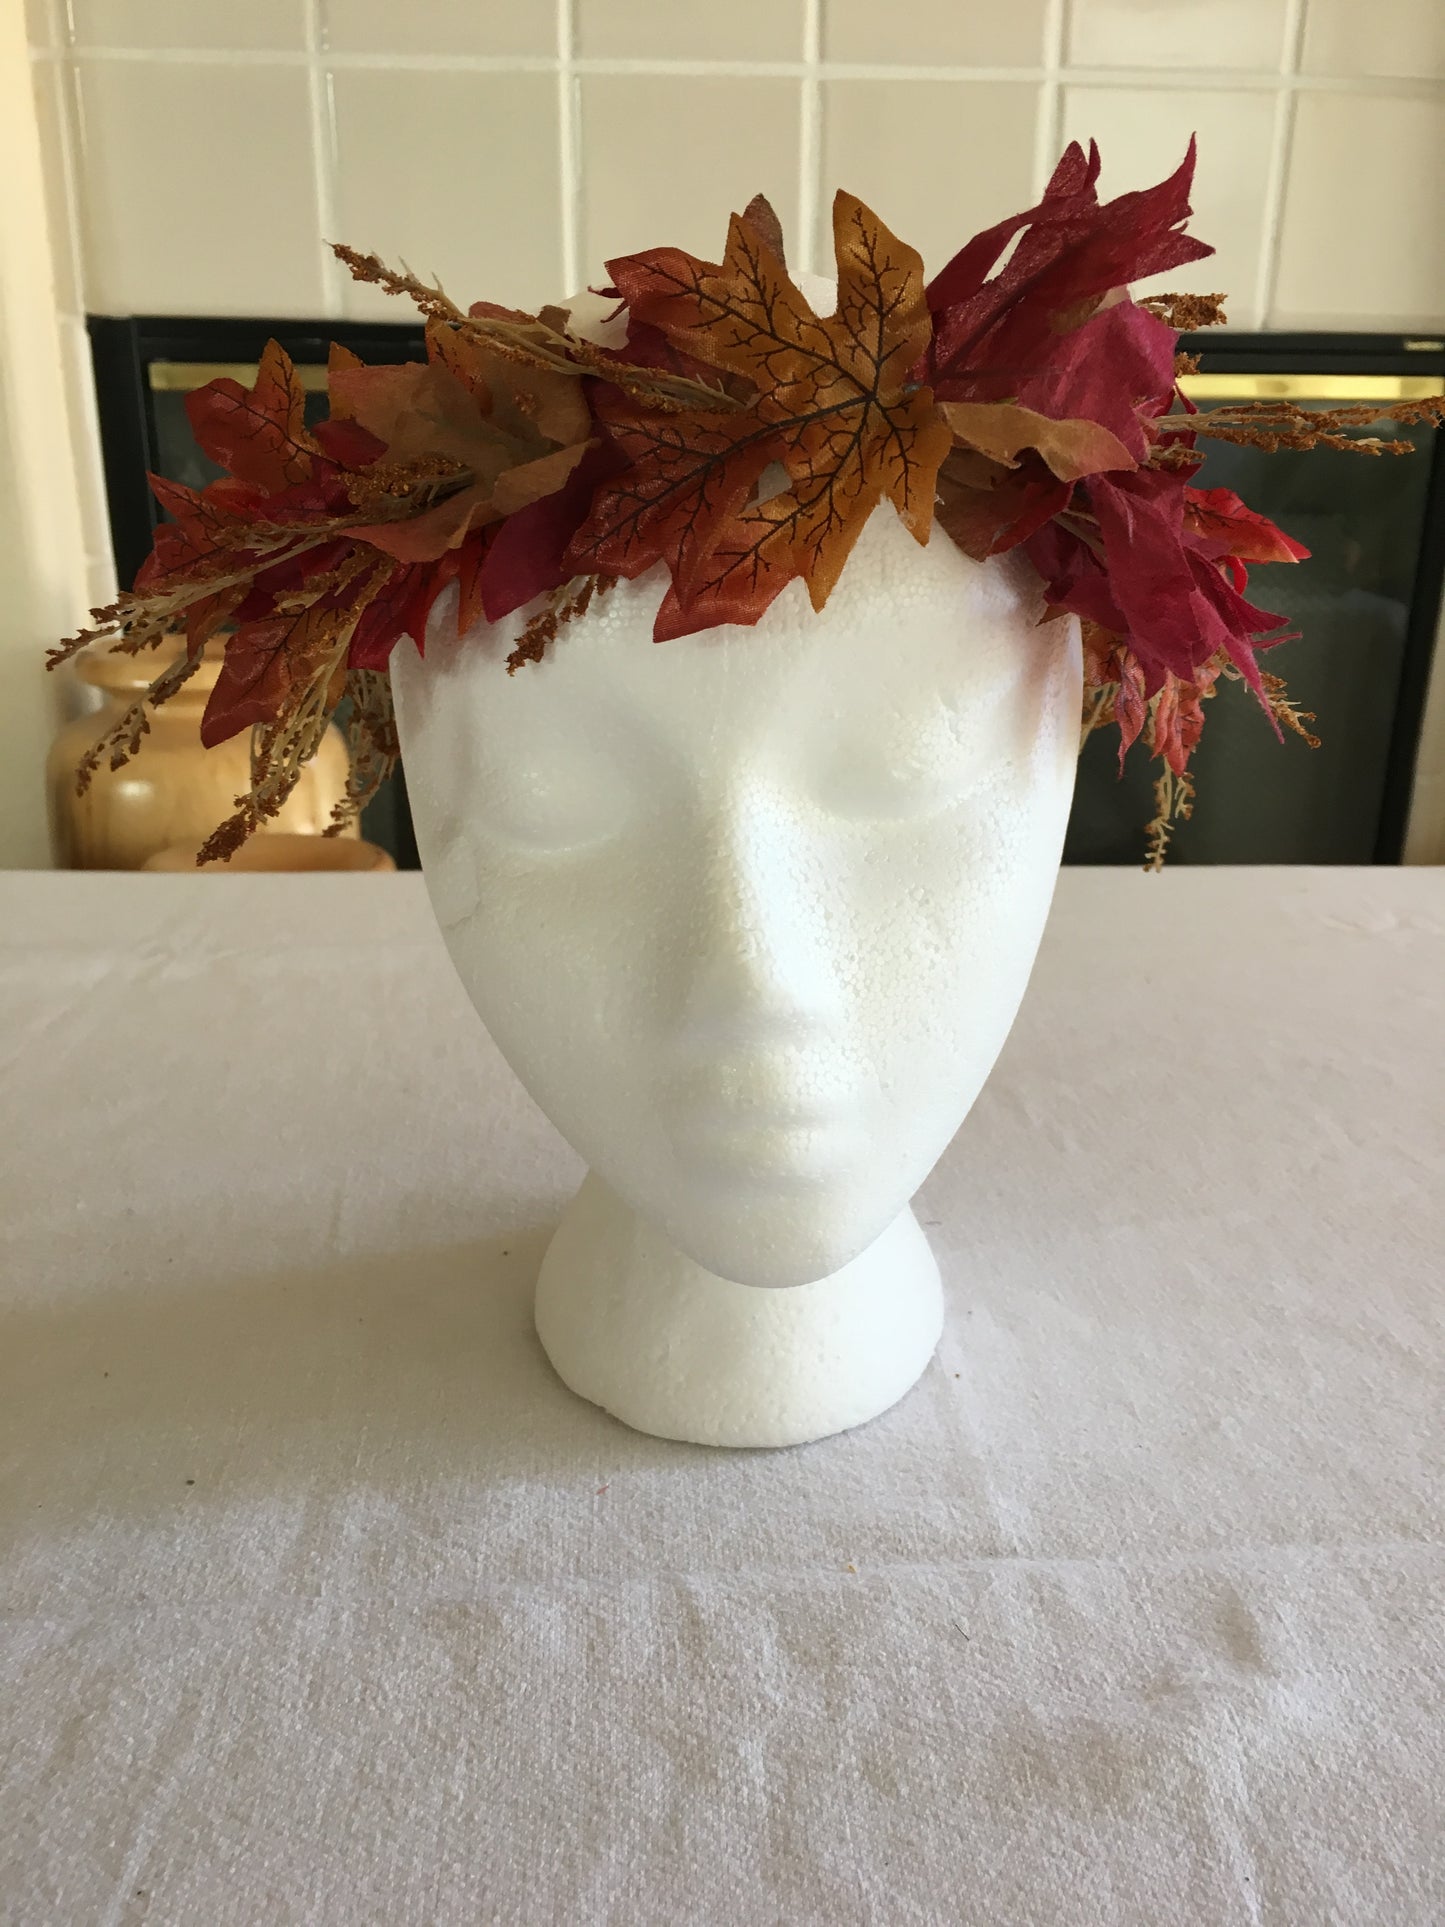 All-Leaf Wreath - Red to beige w/ accents & ribbon